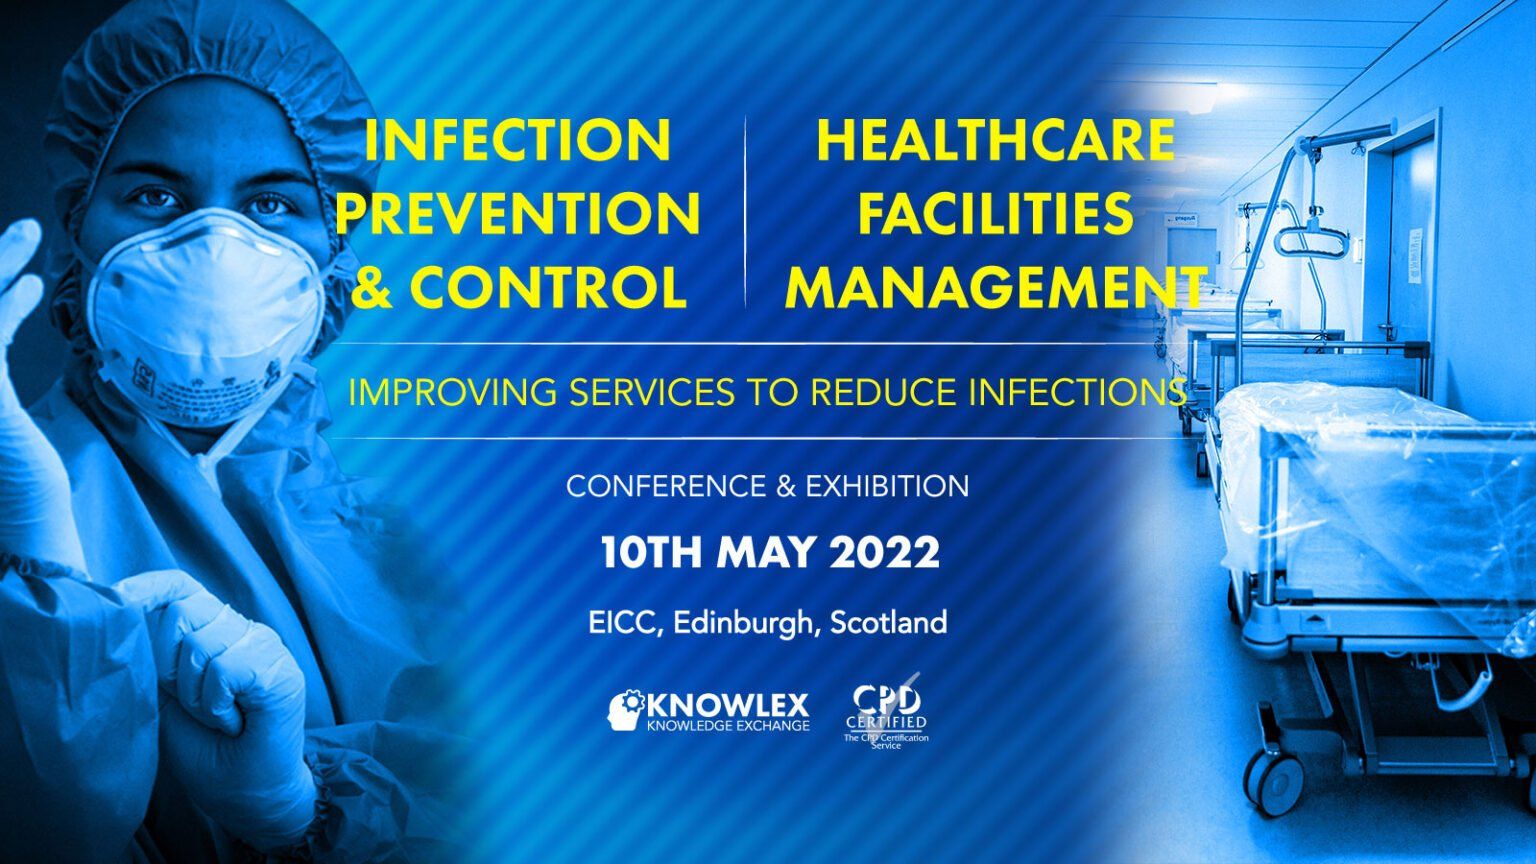 Will you attend the Infection Prevention & Control Conference?